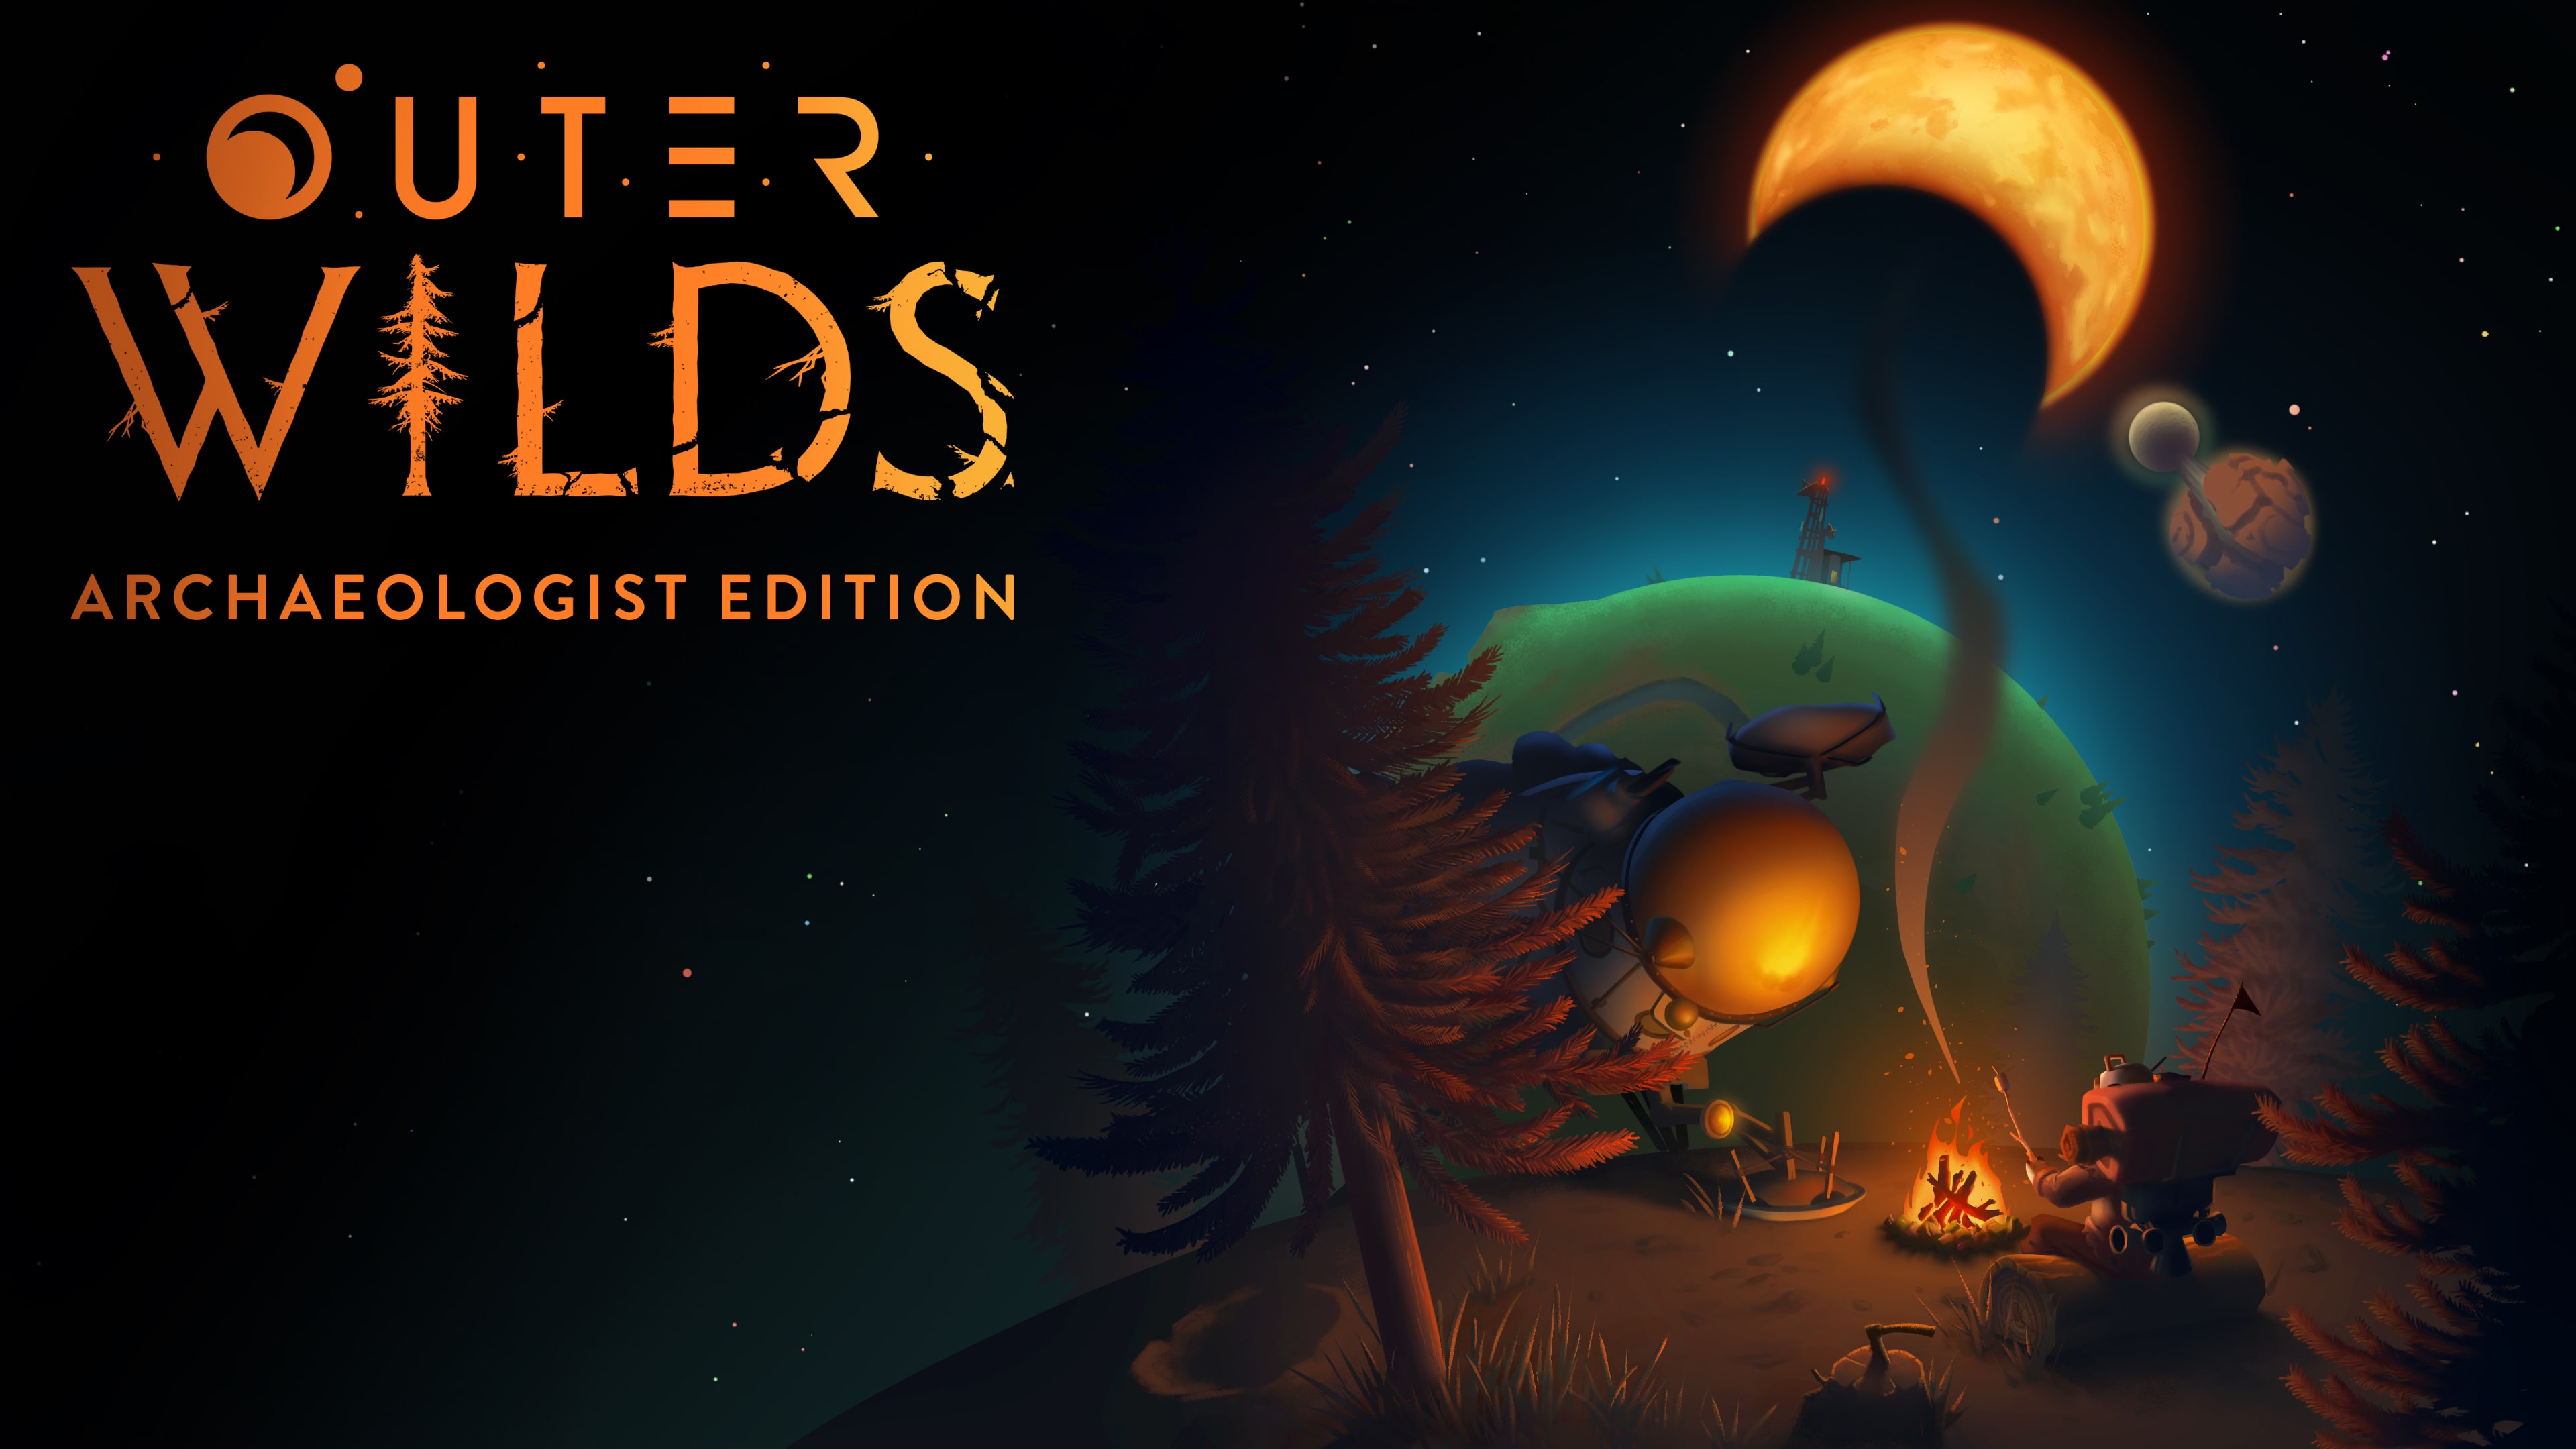 Outer Wilds: Archaeologist Edition (중국어(간체자), 한국어, 영어, 일본어)